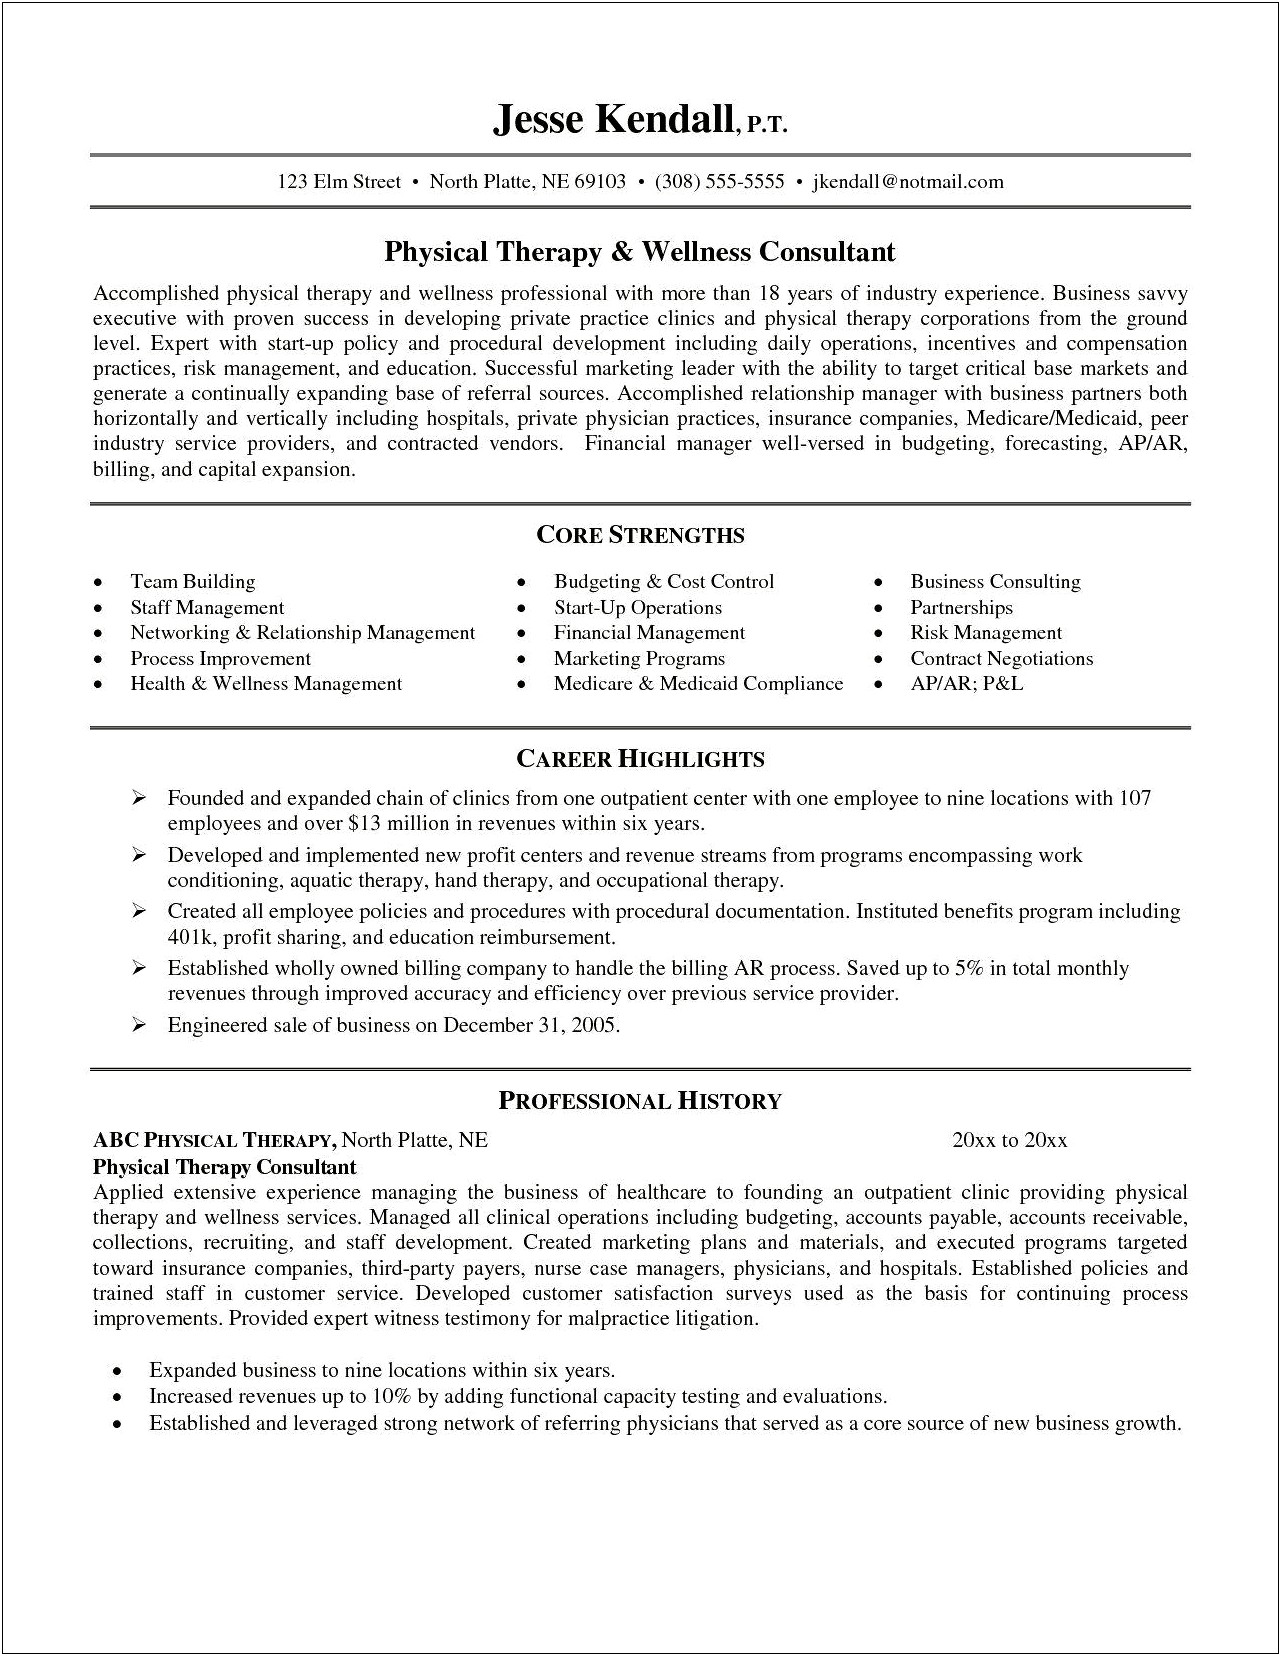 Examples Of Physical Therapy Assistant Resume